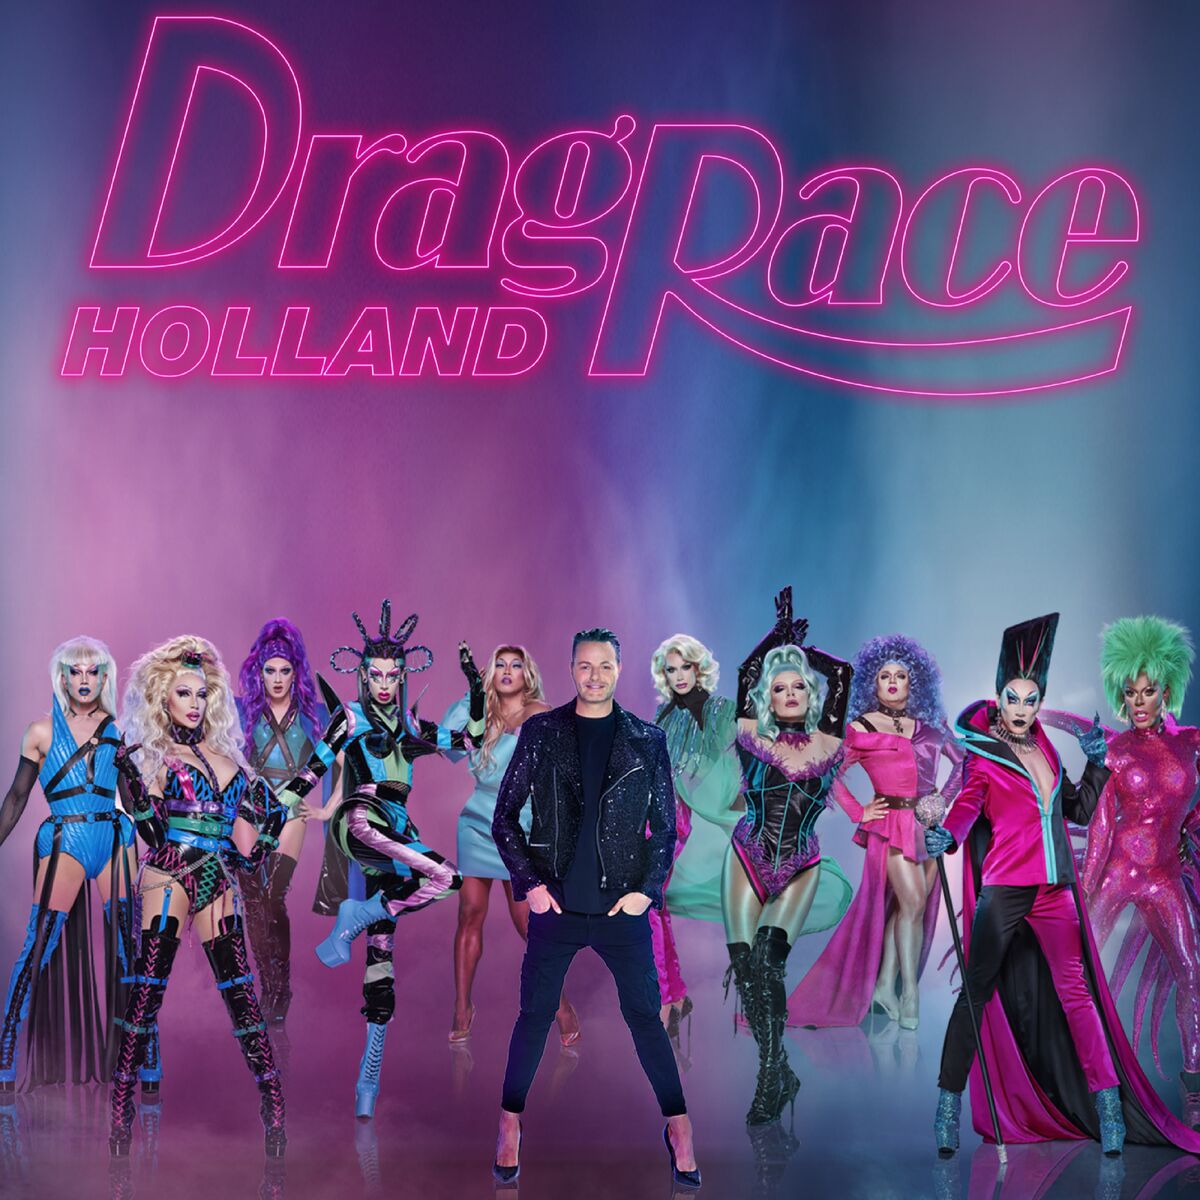 I checked Drag Race Holland 2 Wiki and stumbled upon this. : r